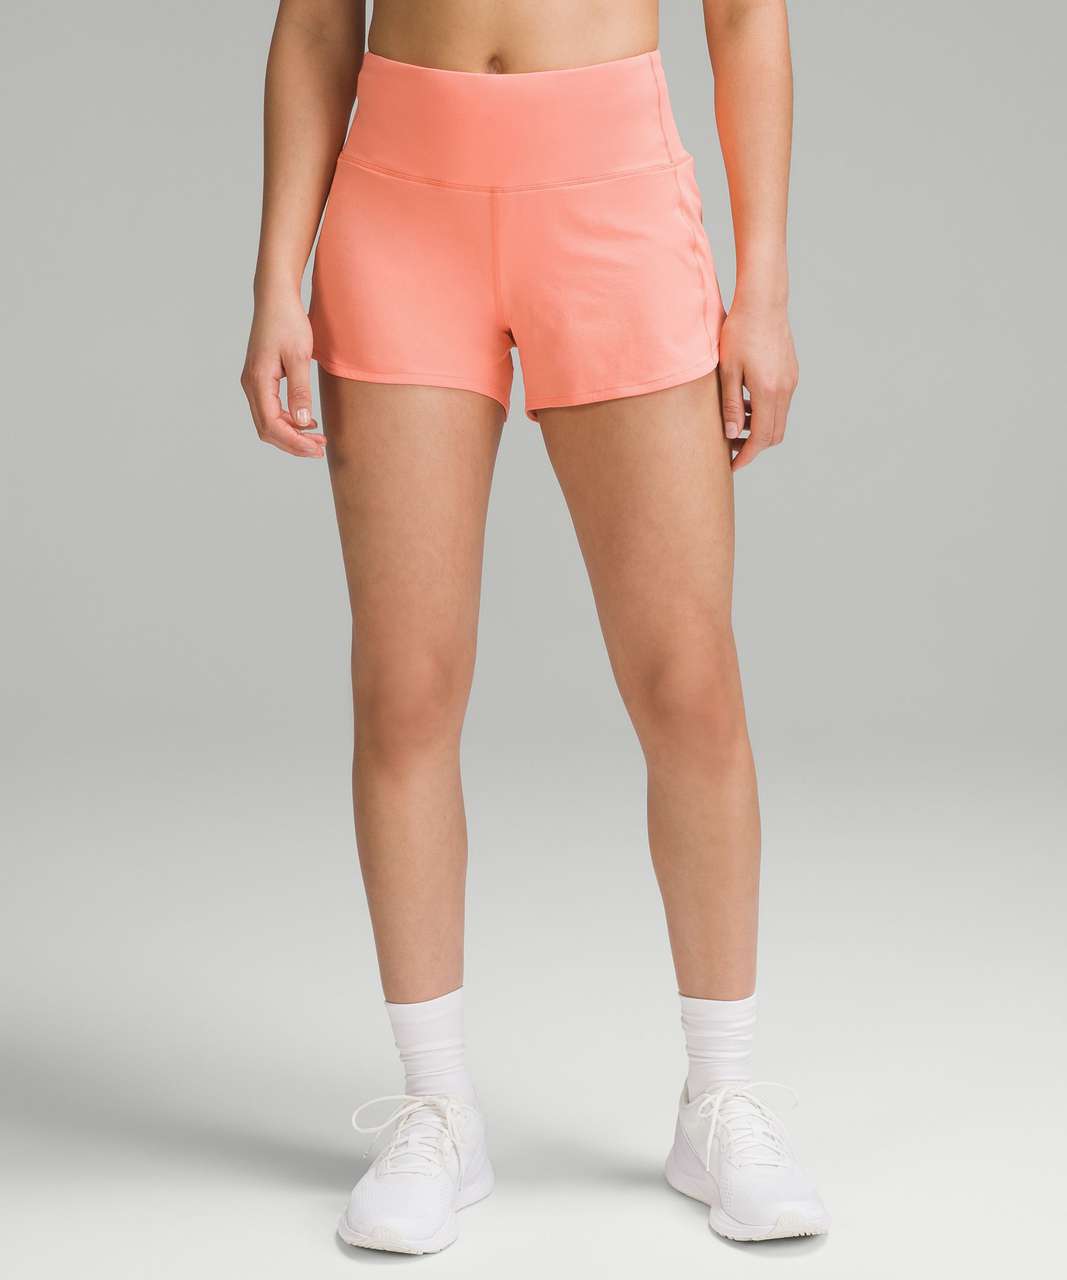 Lululemon Speed Up High-Rise Lined Short 4" - Sunny Coral